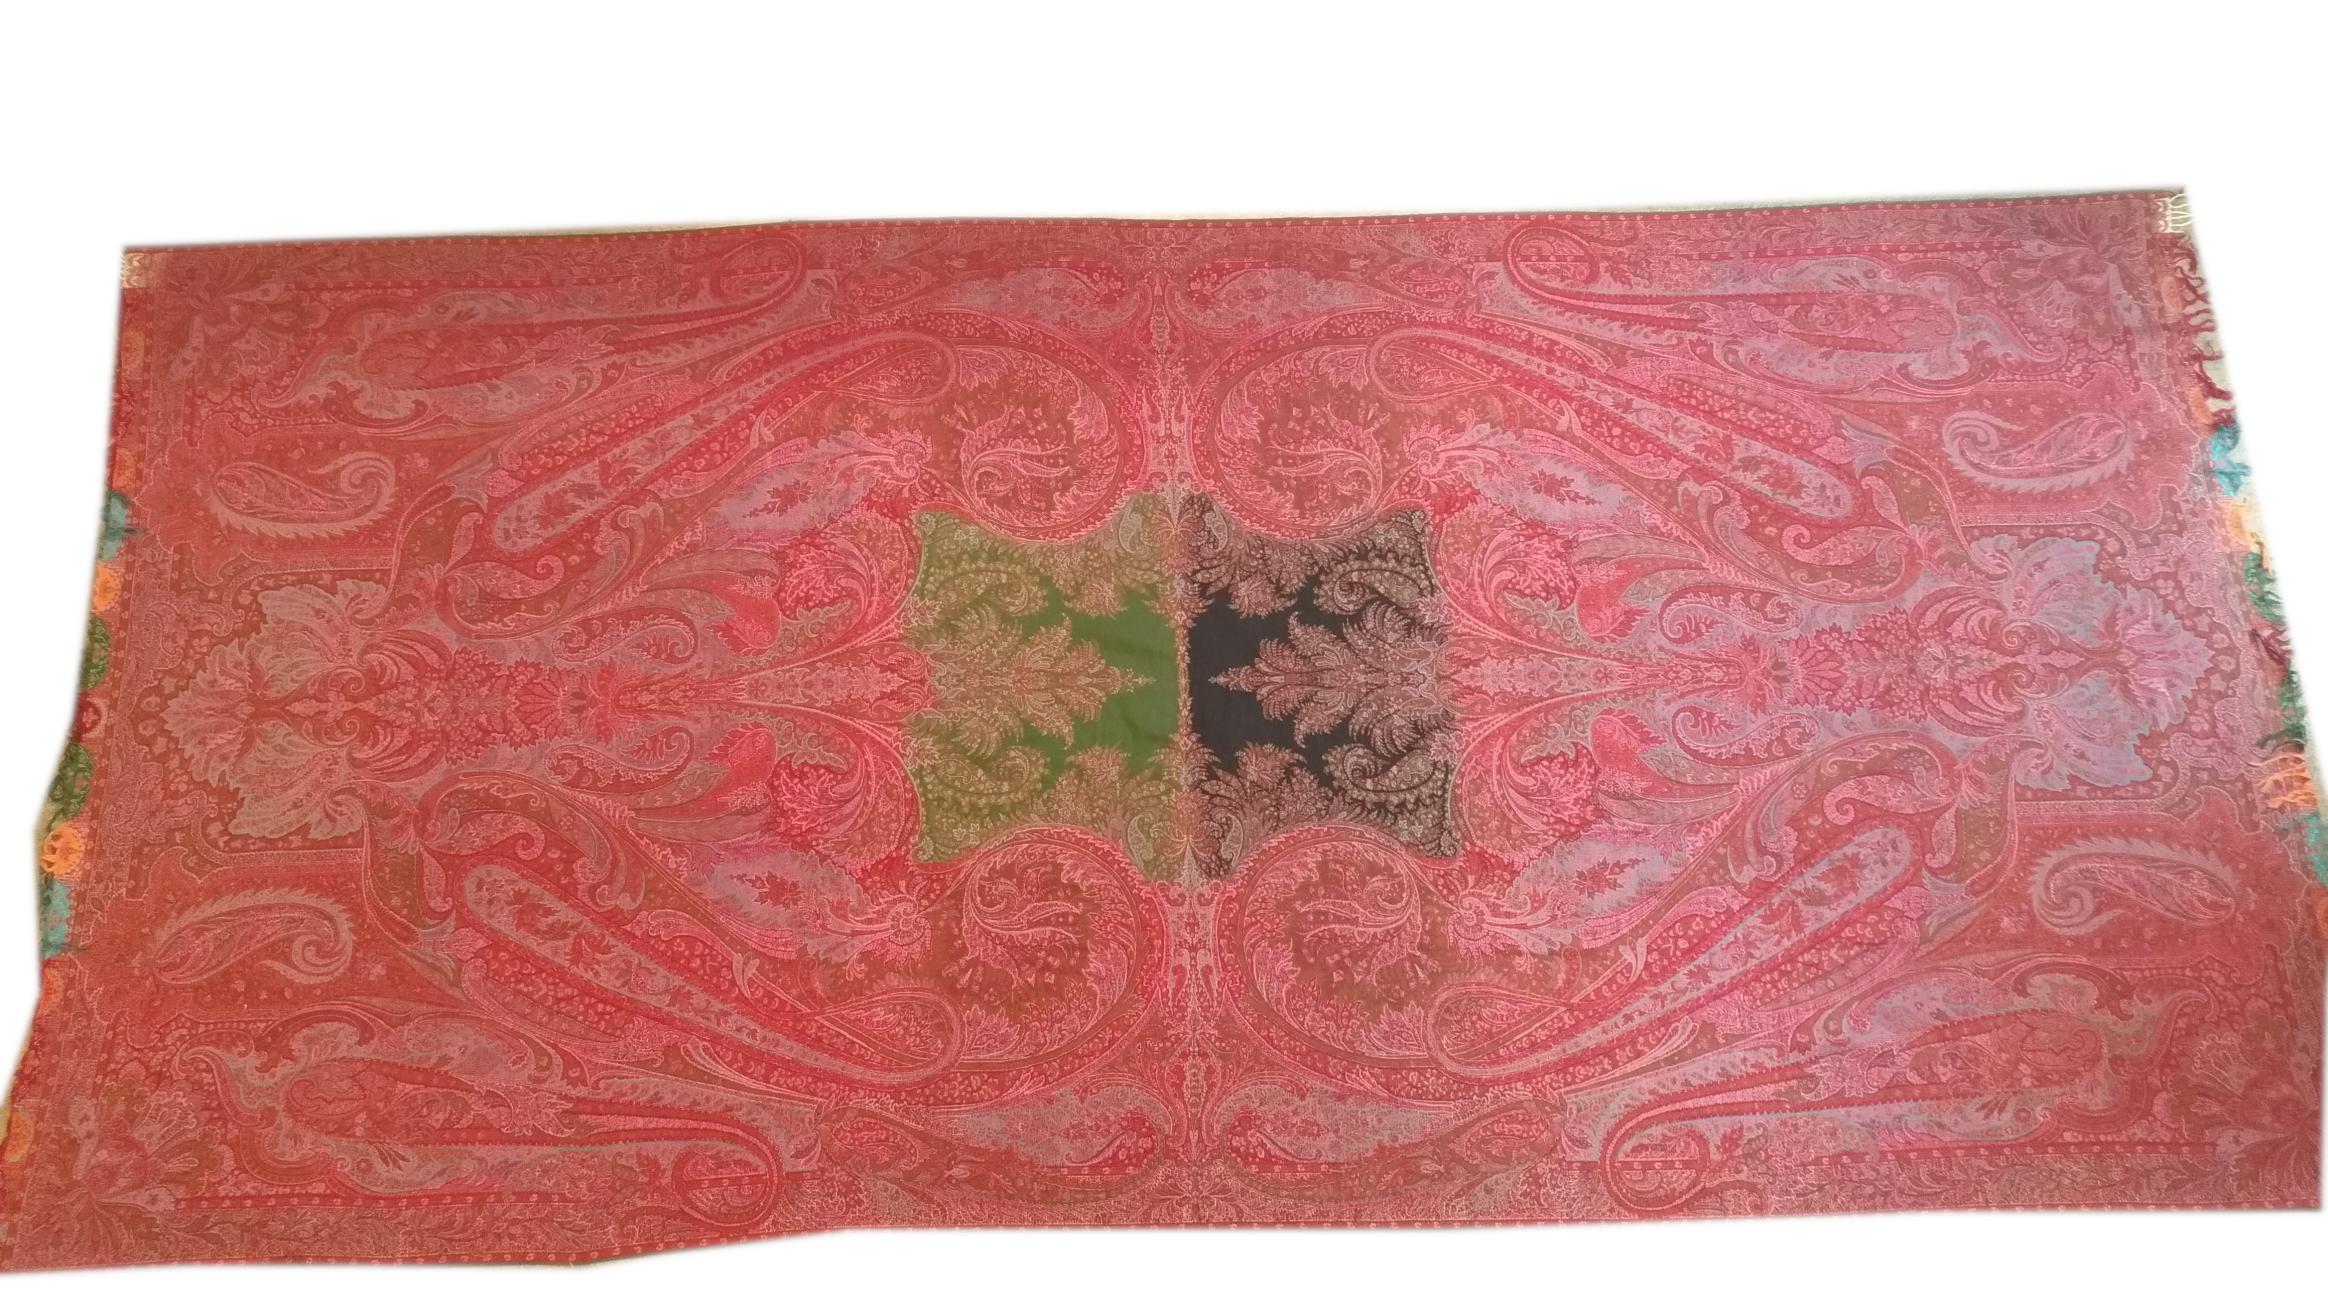  1088 - 19th Century Cashmere Shawl  For Sale 8